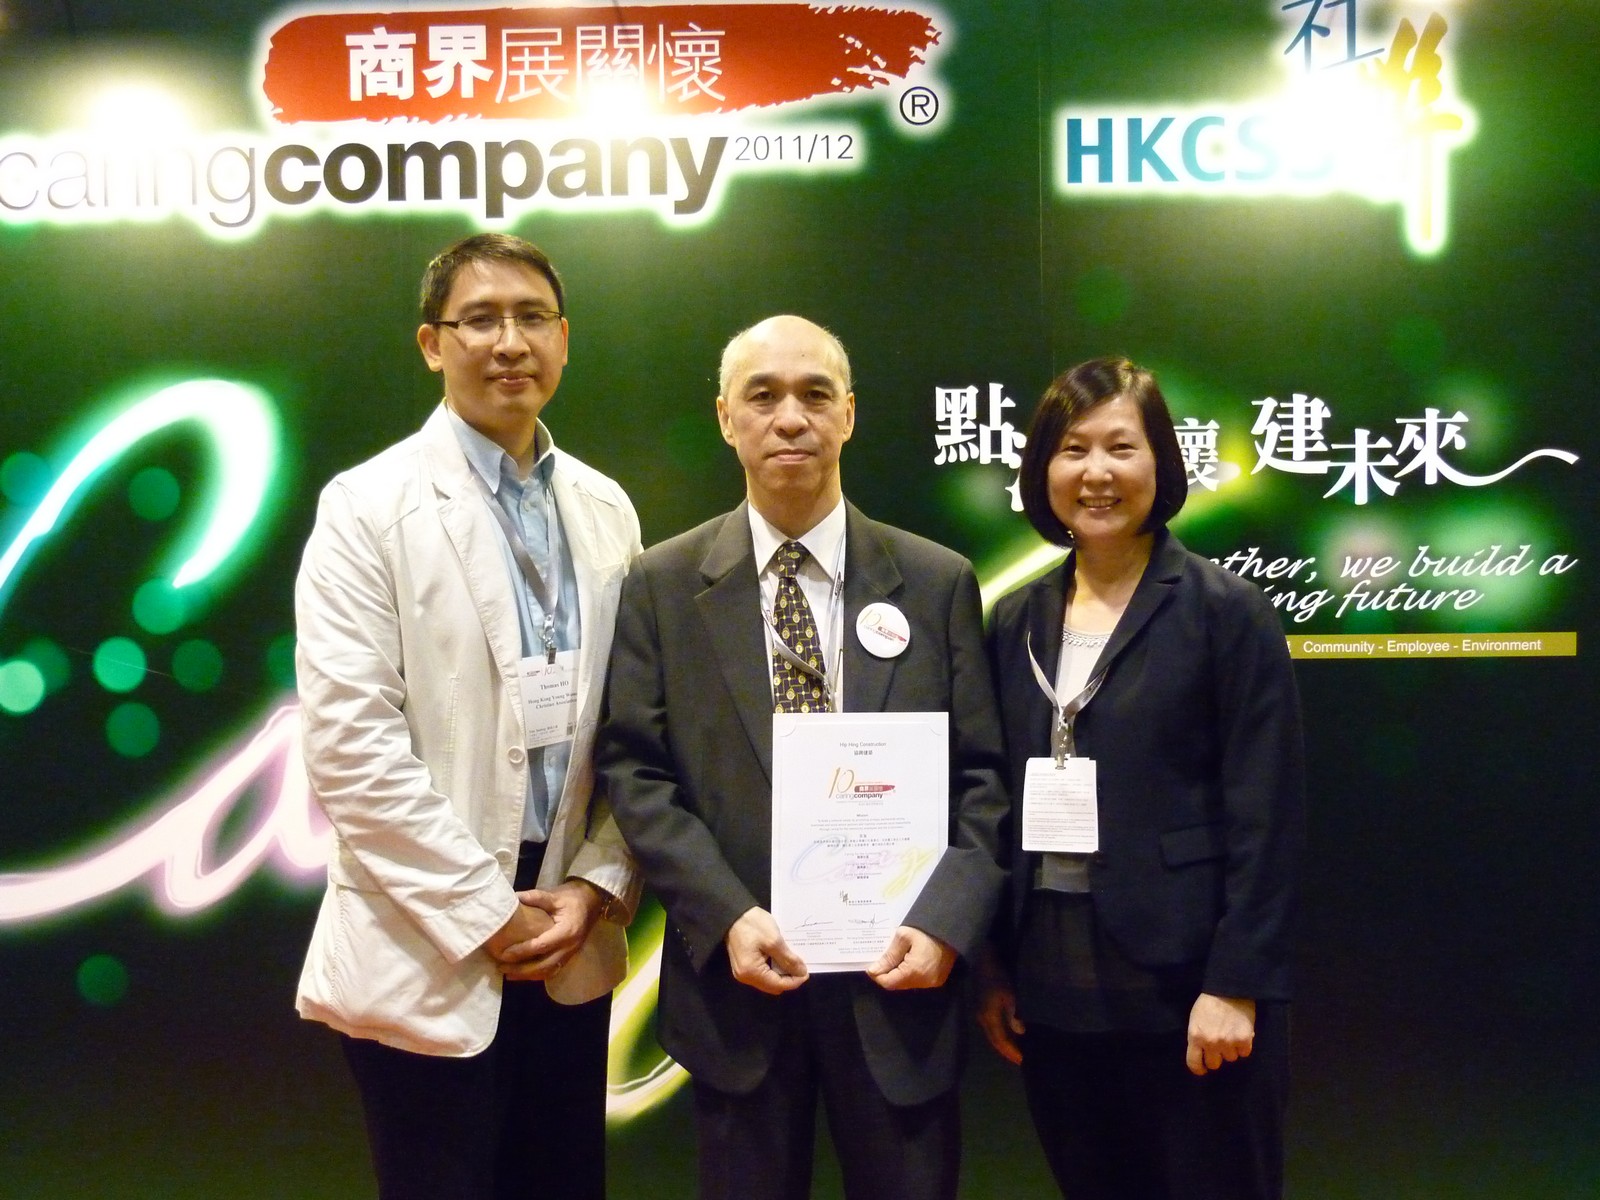 Hip Hing Construction receives 10 consecutive years Caring Company Logo from HKCSS